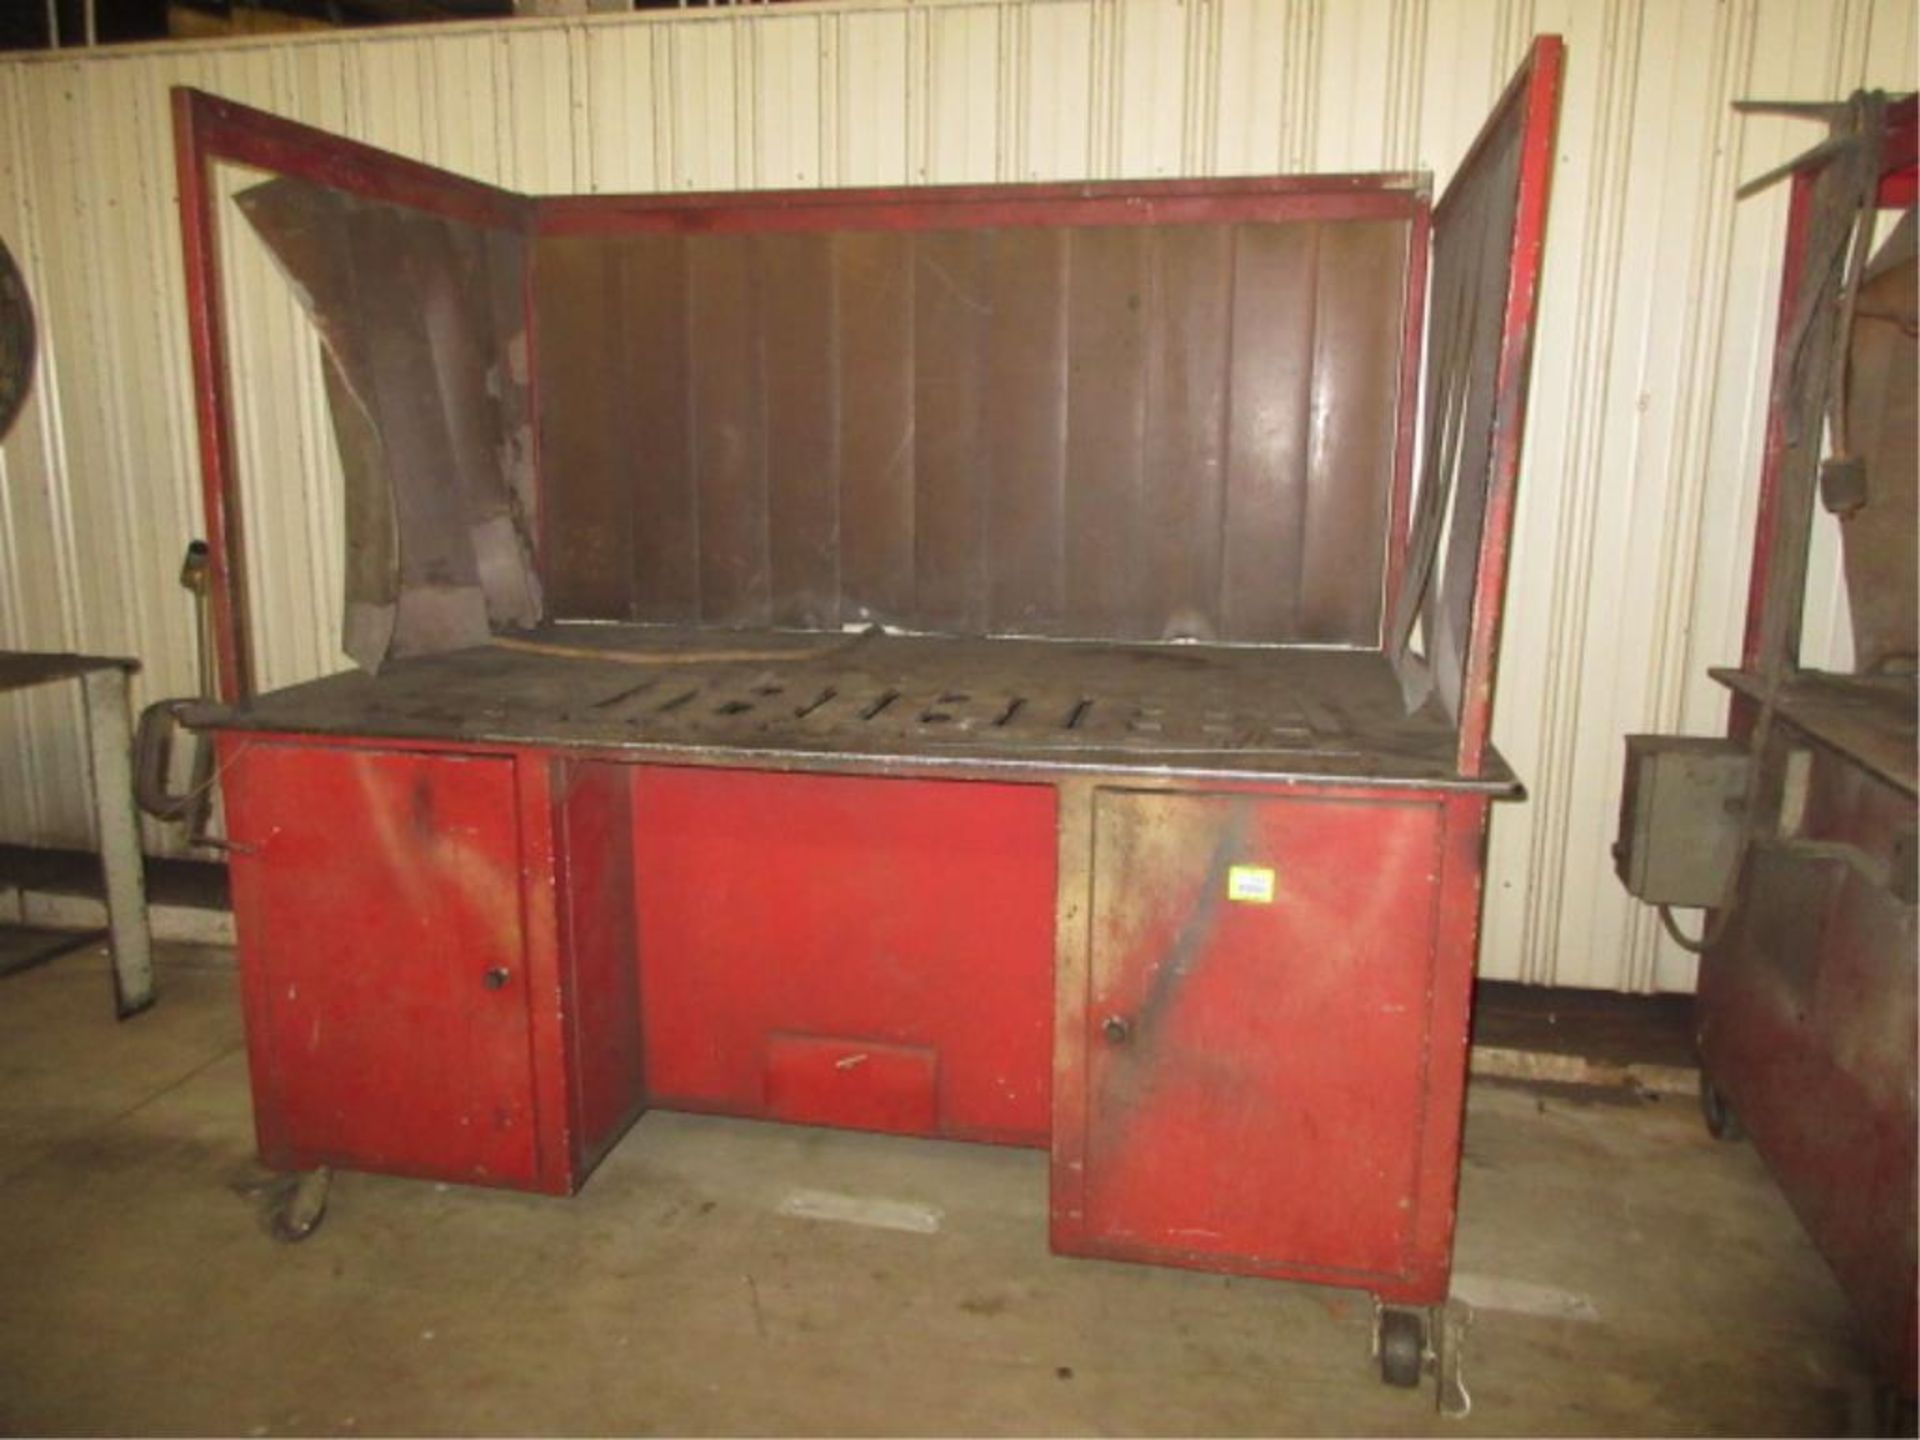 Downdraft Table. Mobile Downdraft Table. HIT# 2179066. Loc: main floor. Asset Located at 430 West